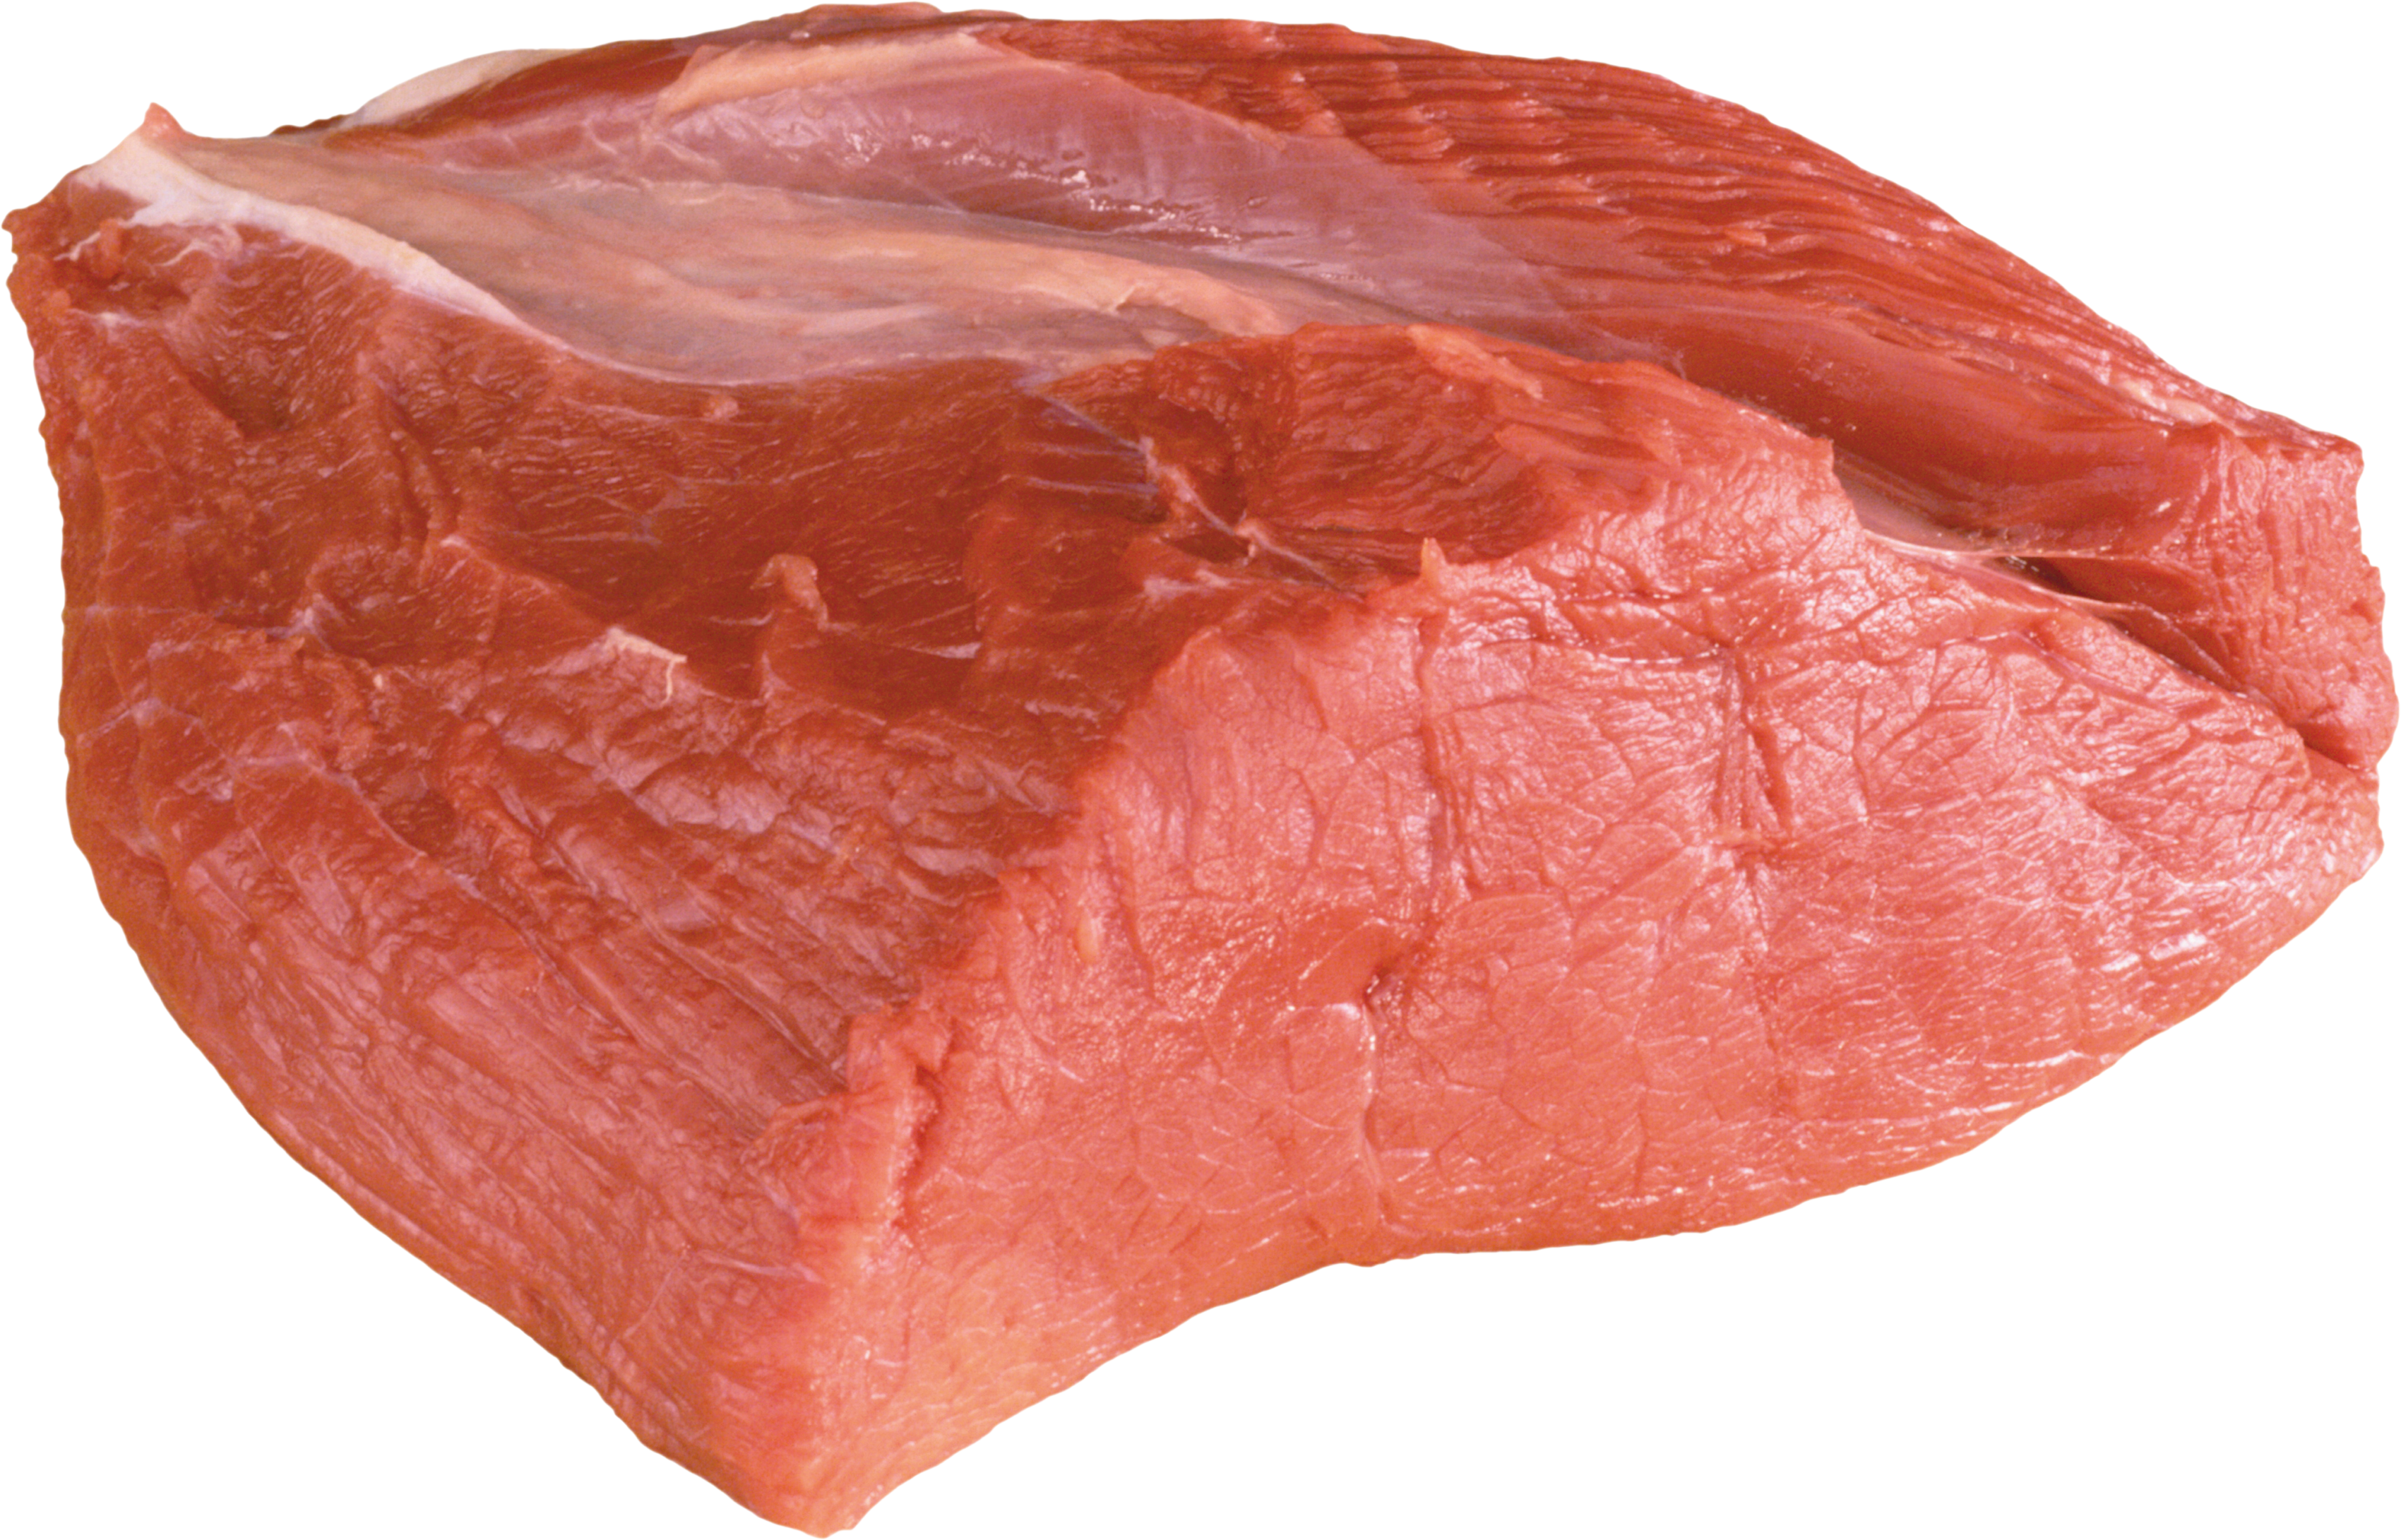 Download PNG image - Meat Fre